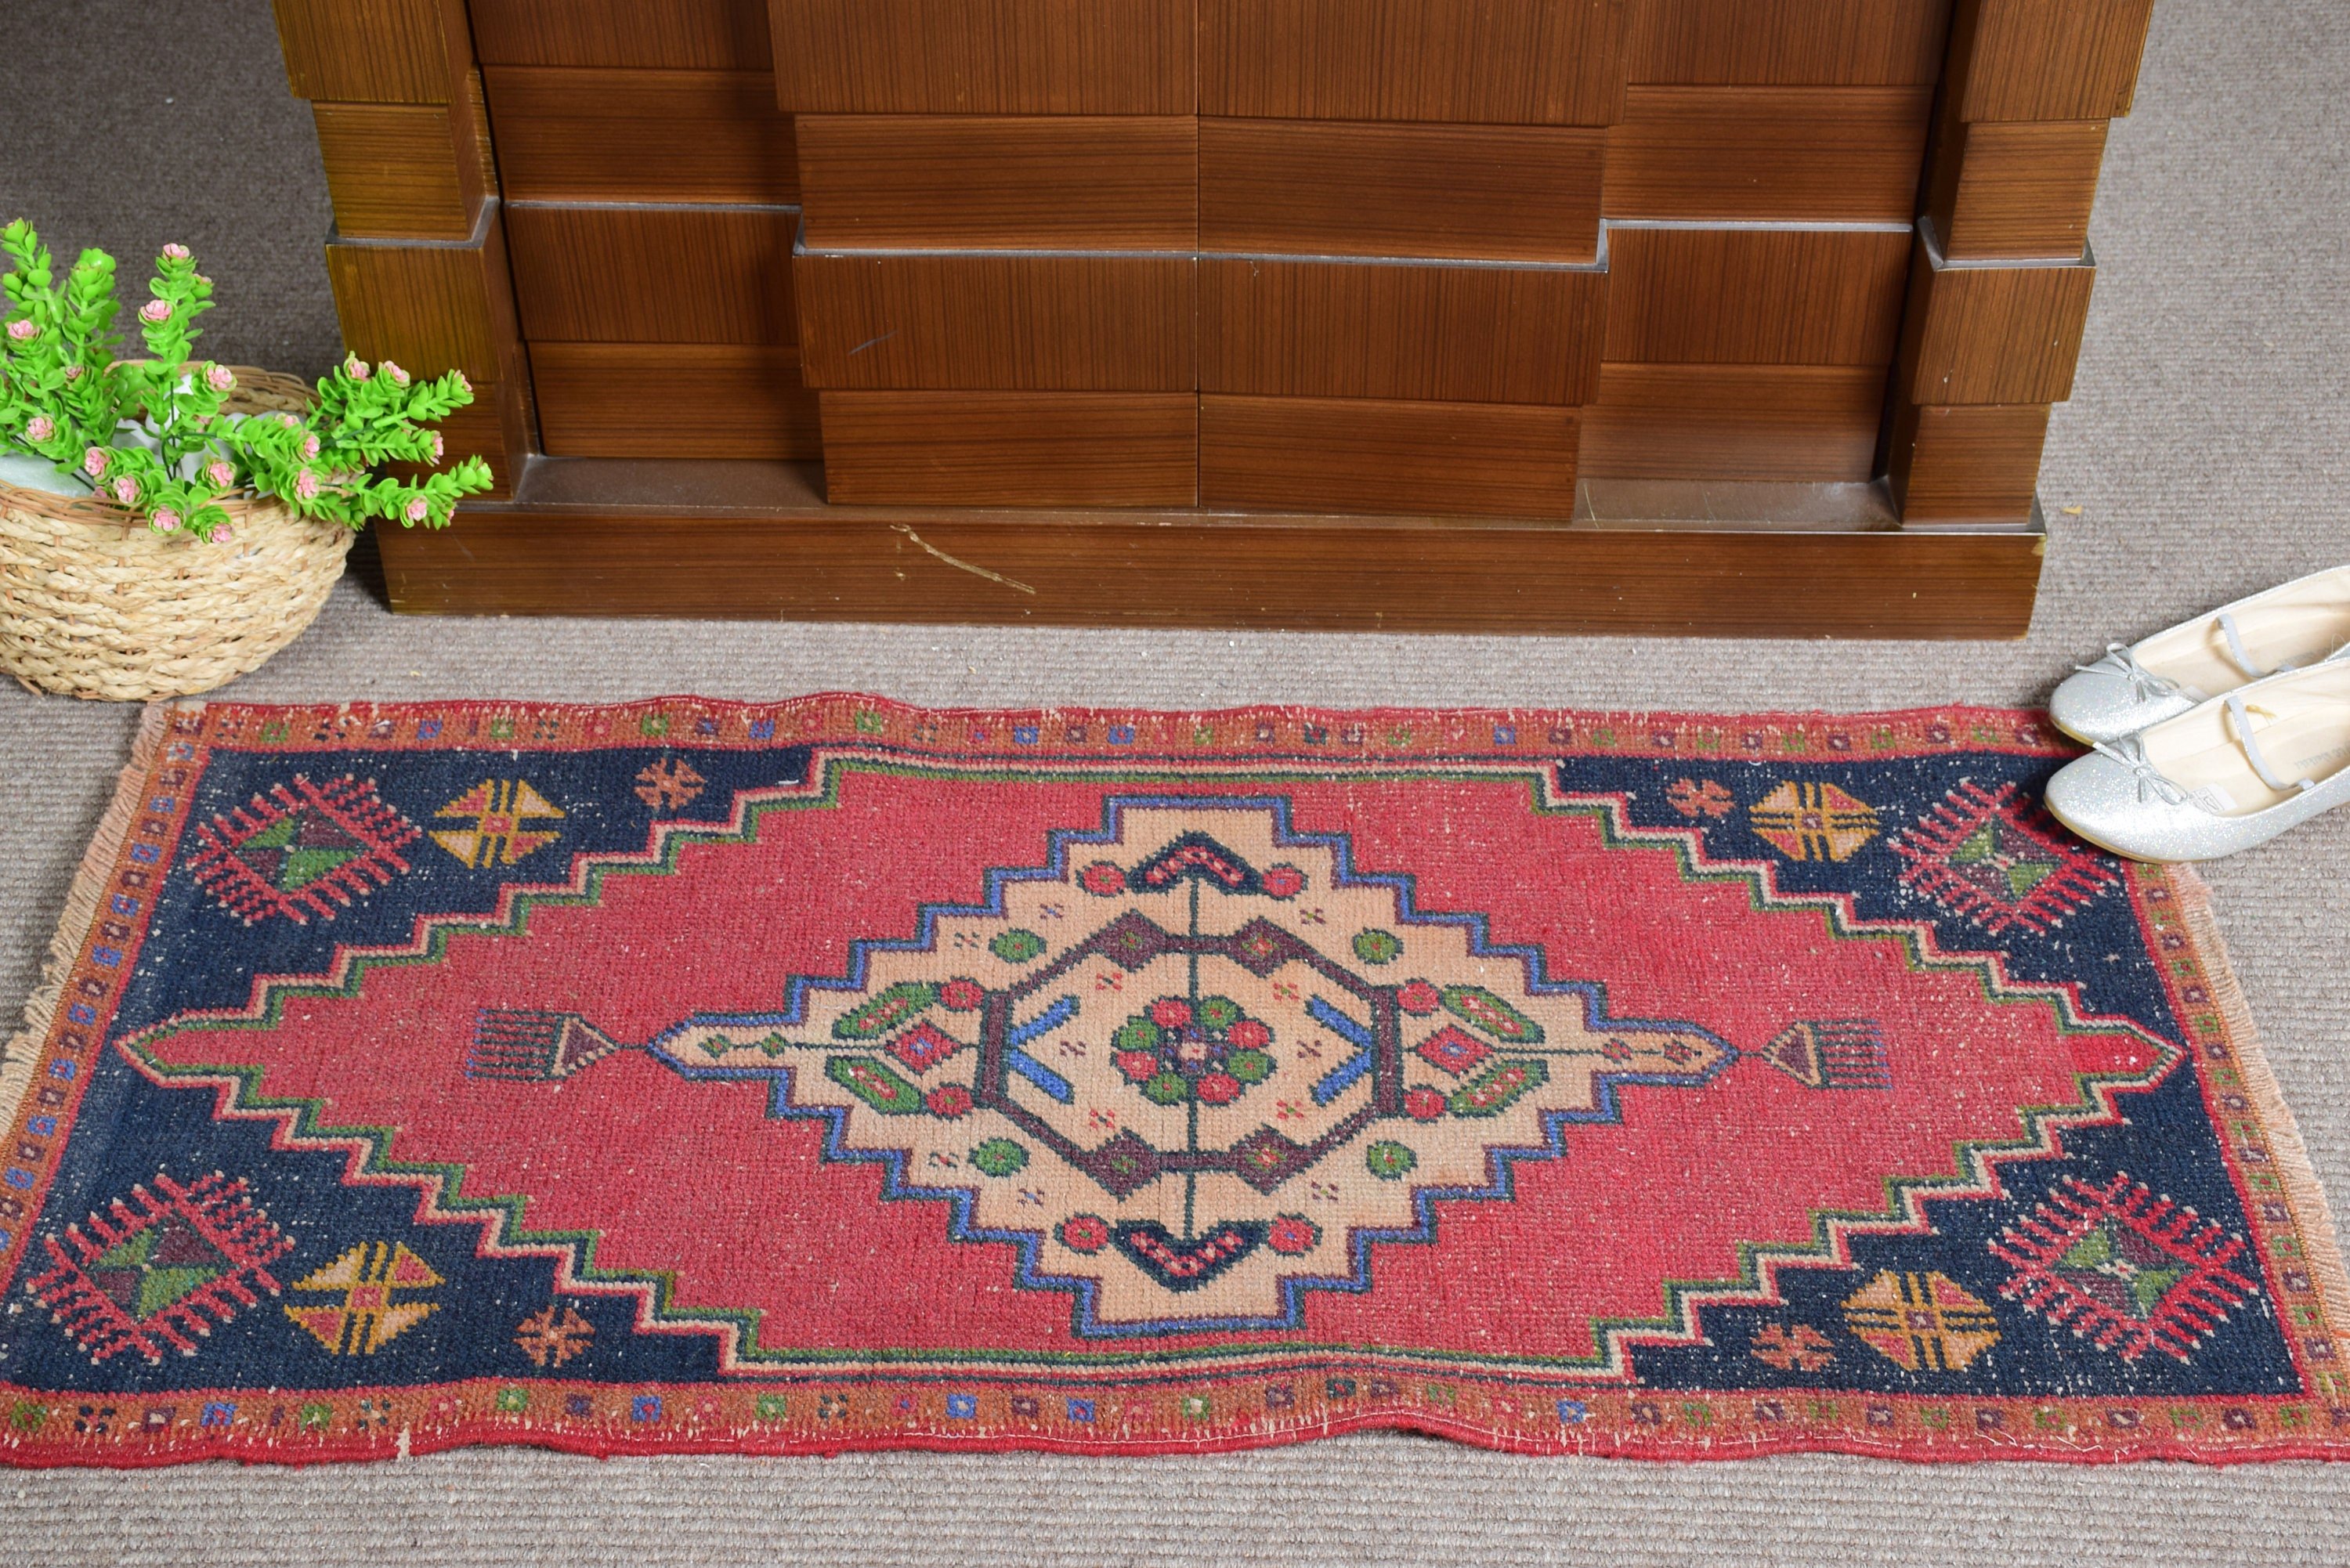 Rugs for Bedroom, Vintage Rug, Antique Rugs, Bathroom Rugs, Car Mat Rug, Turkish Rugs, 1.8x3.7 ft Small Rug, Red Antique Rug